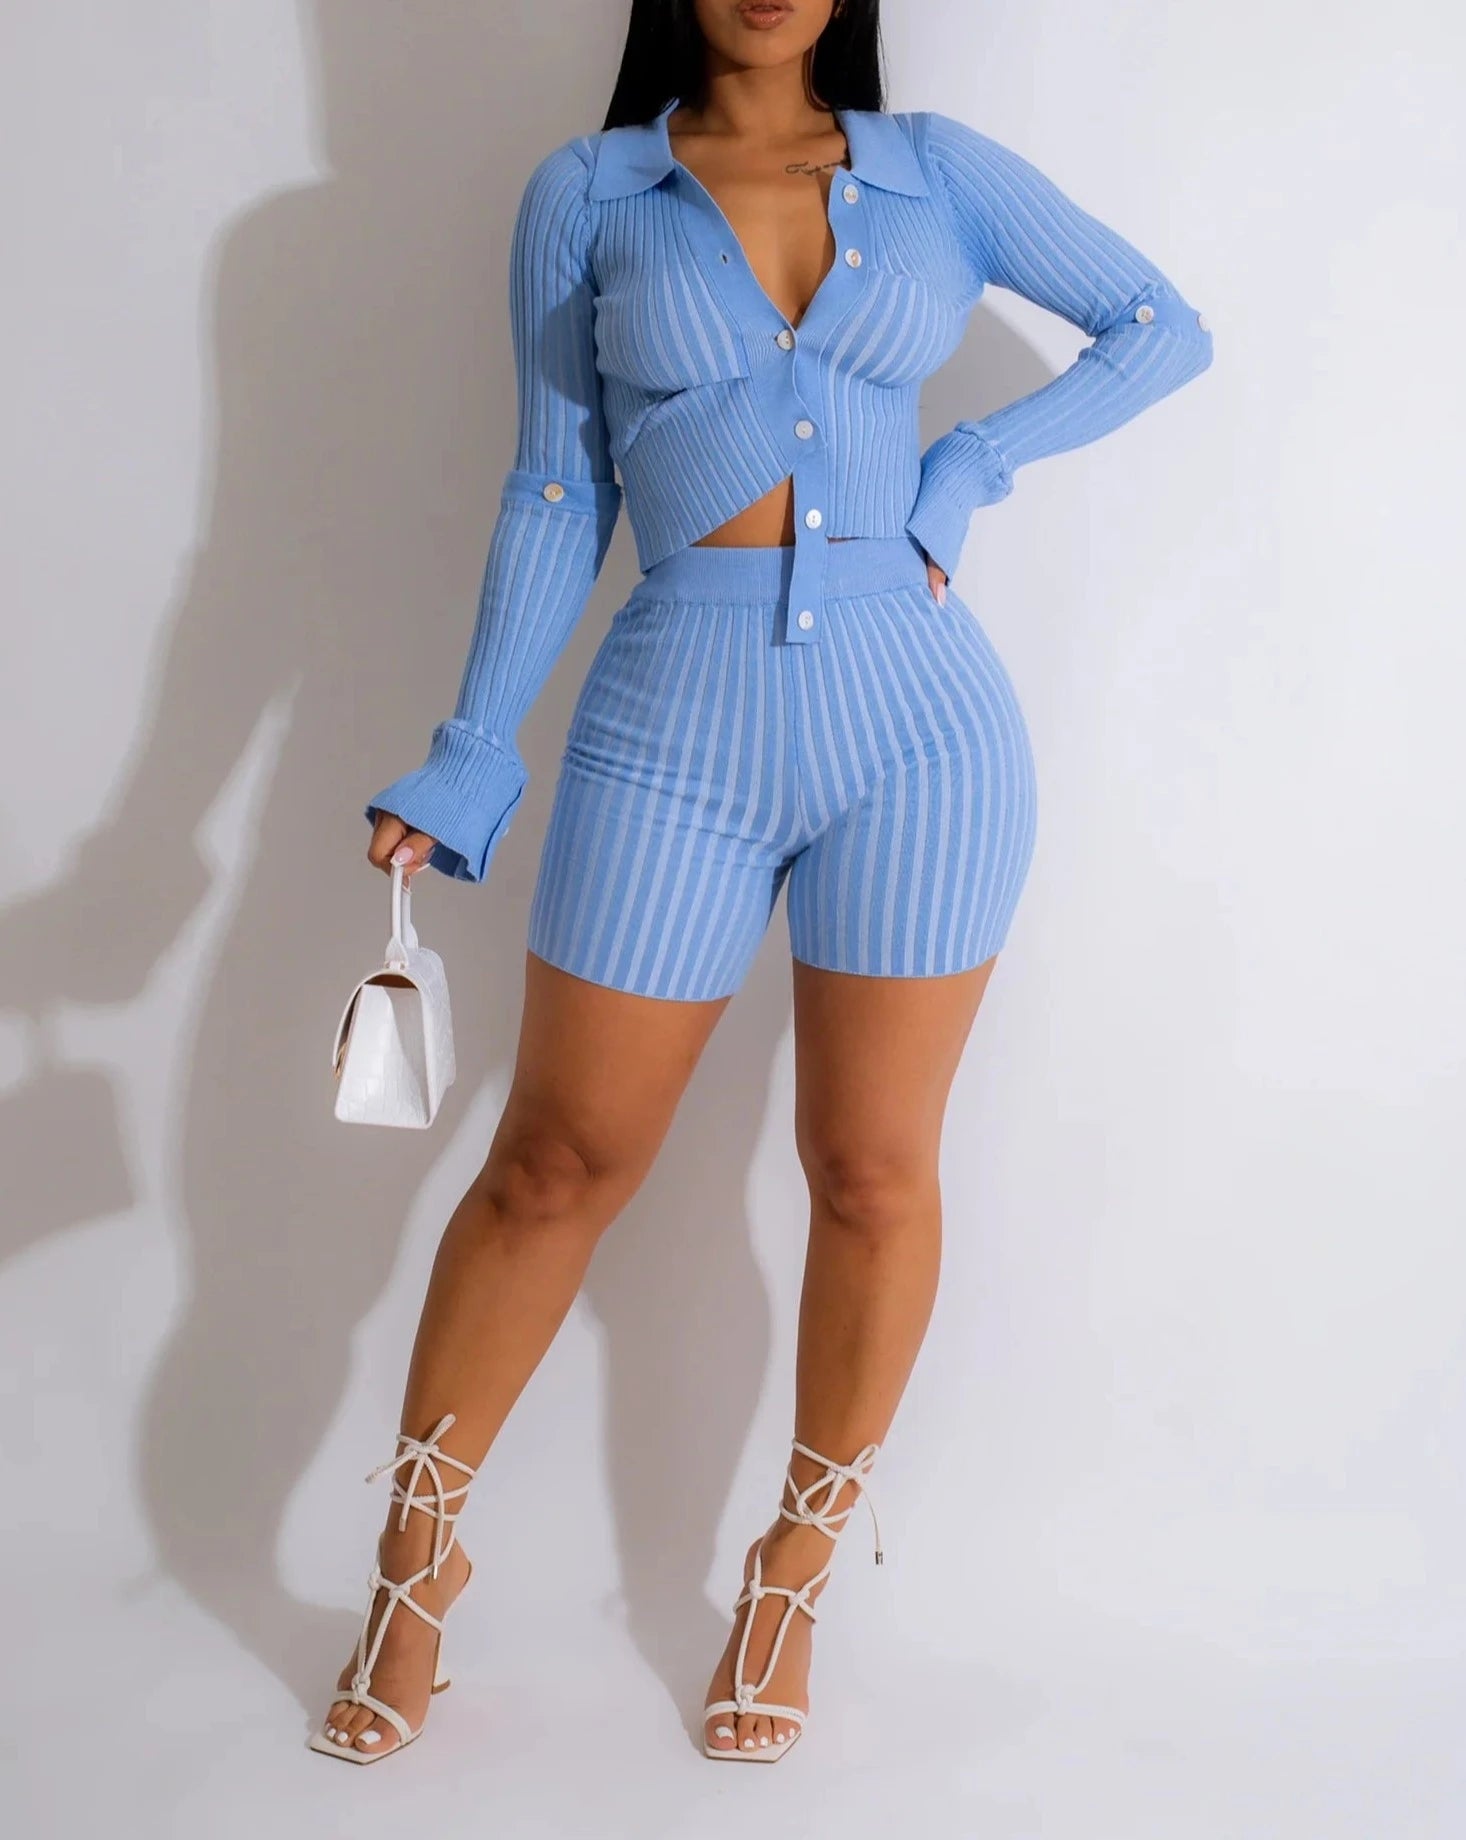 Be Noticed Ribbed Biker Short Set BLUESimplyDerri
The Be Noticed Ribbed Biker Short Set is designed to exemplify casual luxury style. Its lightweight knit fabric is delightfully soft and stretchy for a comfortable Outfit SetsNoticed Ribbed Biker Short Set BLUE